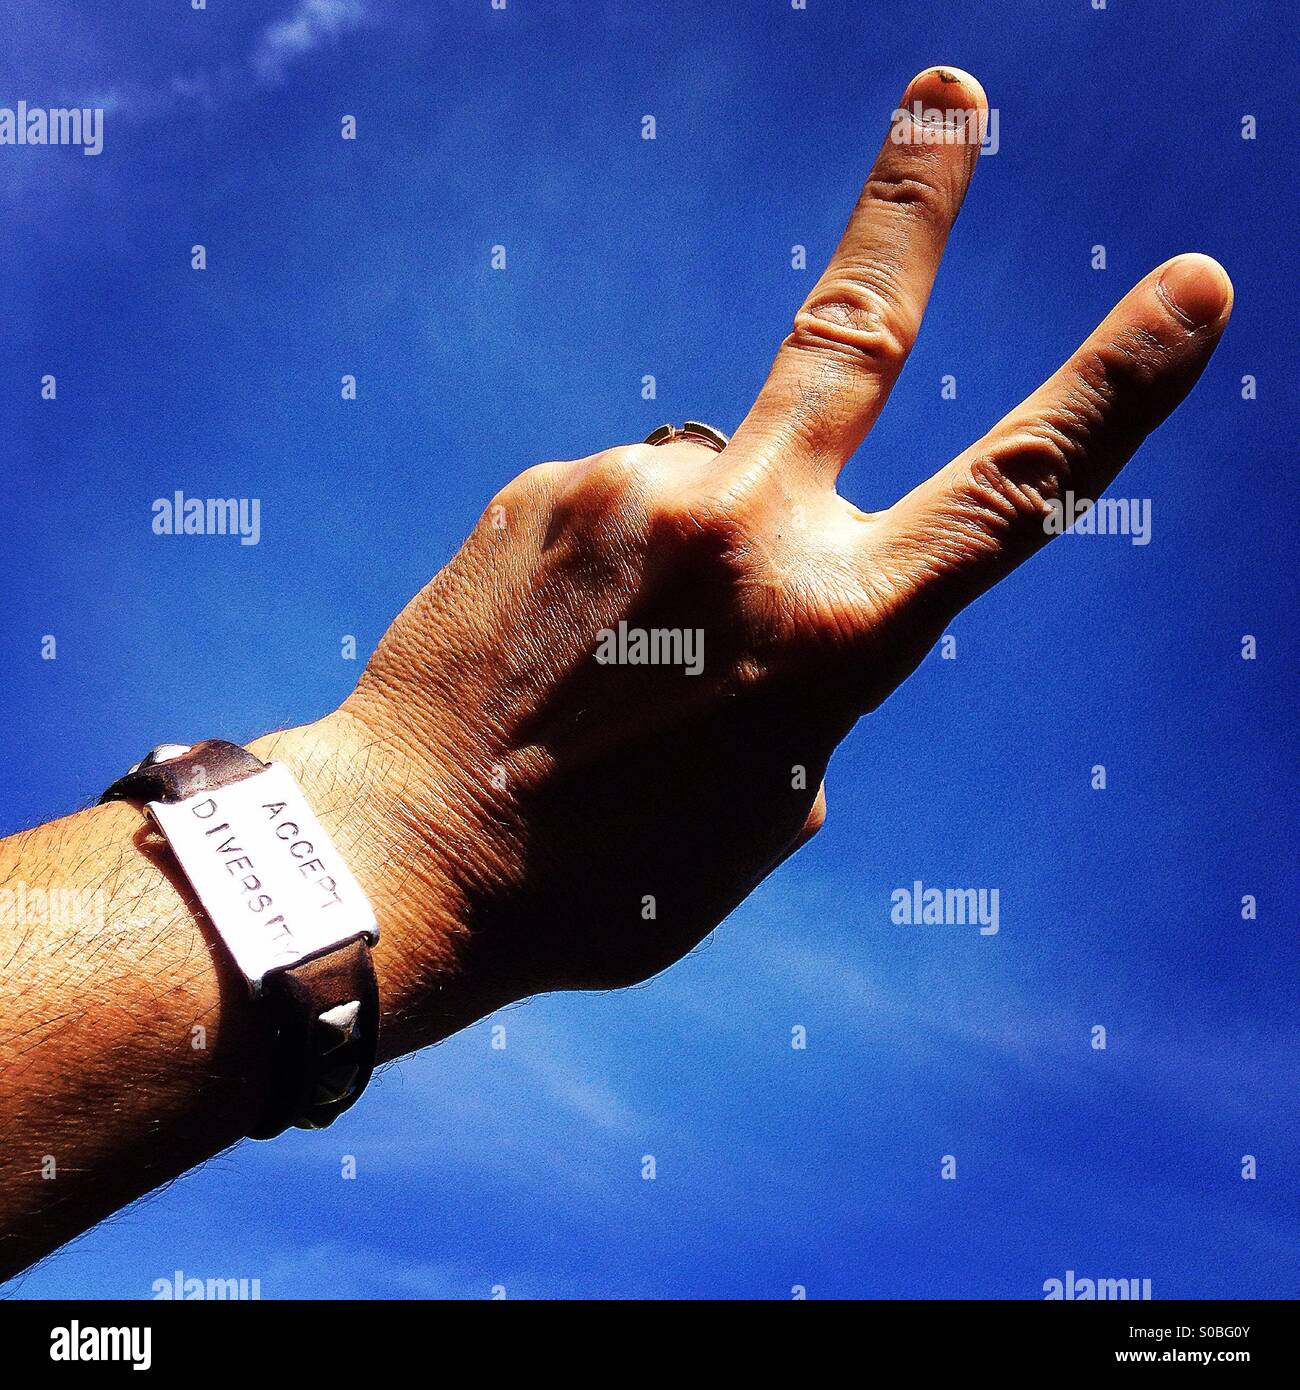 'Accept Diversity' leather and steel bracelet on man making two finger peace sign at sky Stock Photo